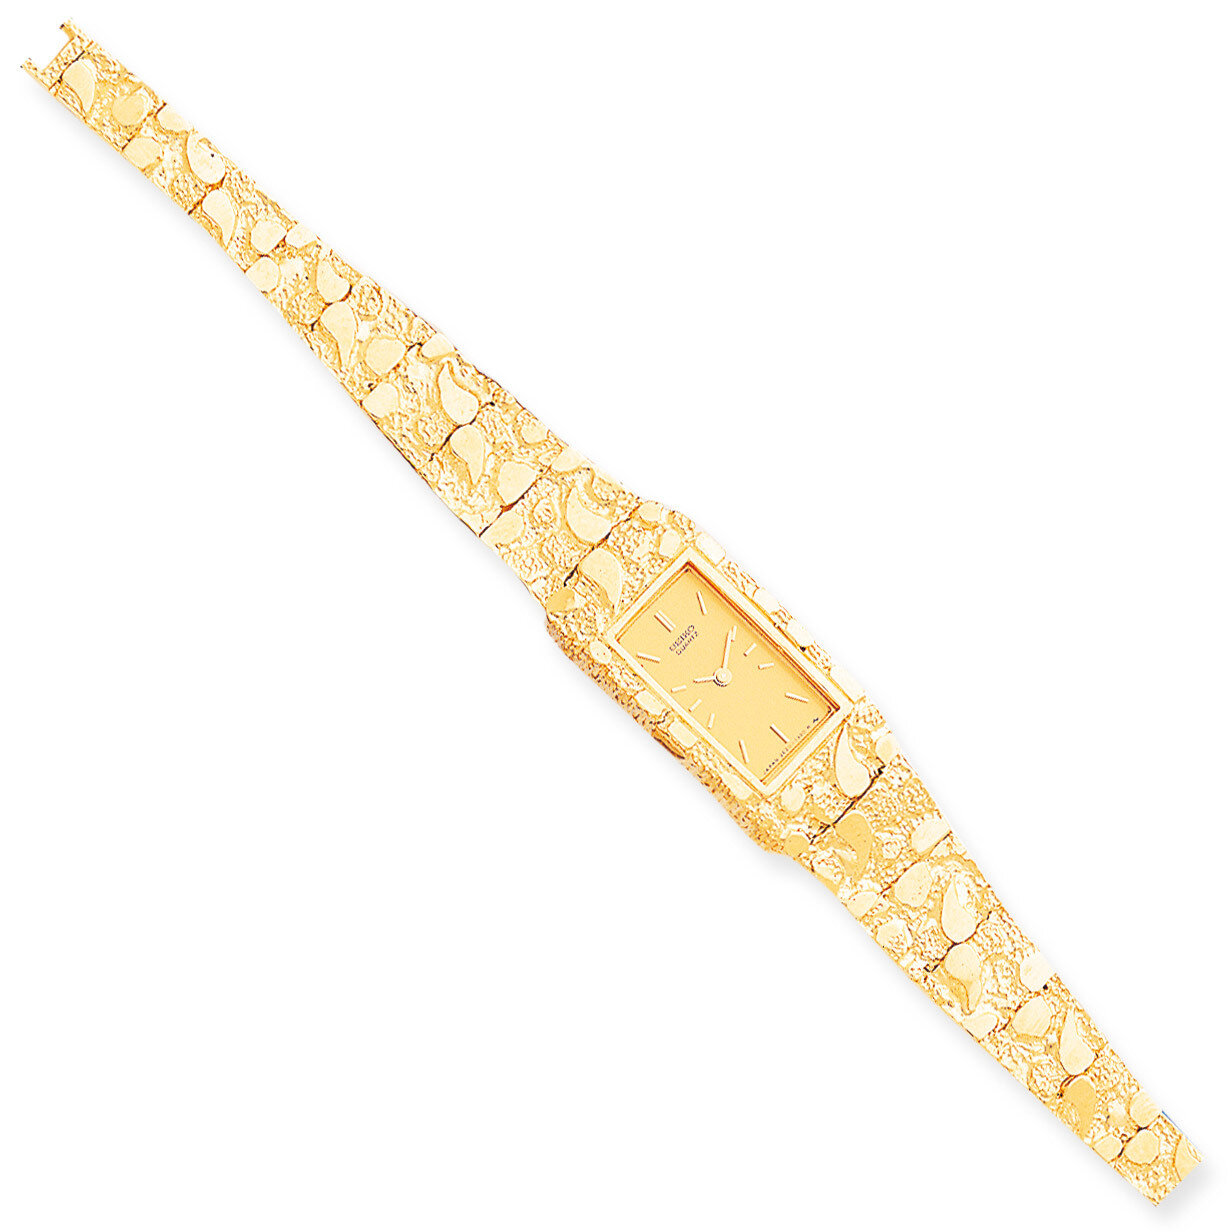 Champagne 15x31mm Dial Rectangular Face Nugget Watch 10k Gold 10N261Y-7